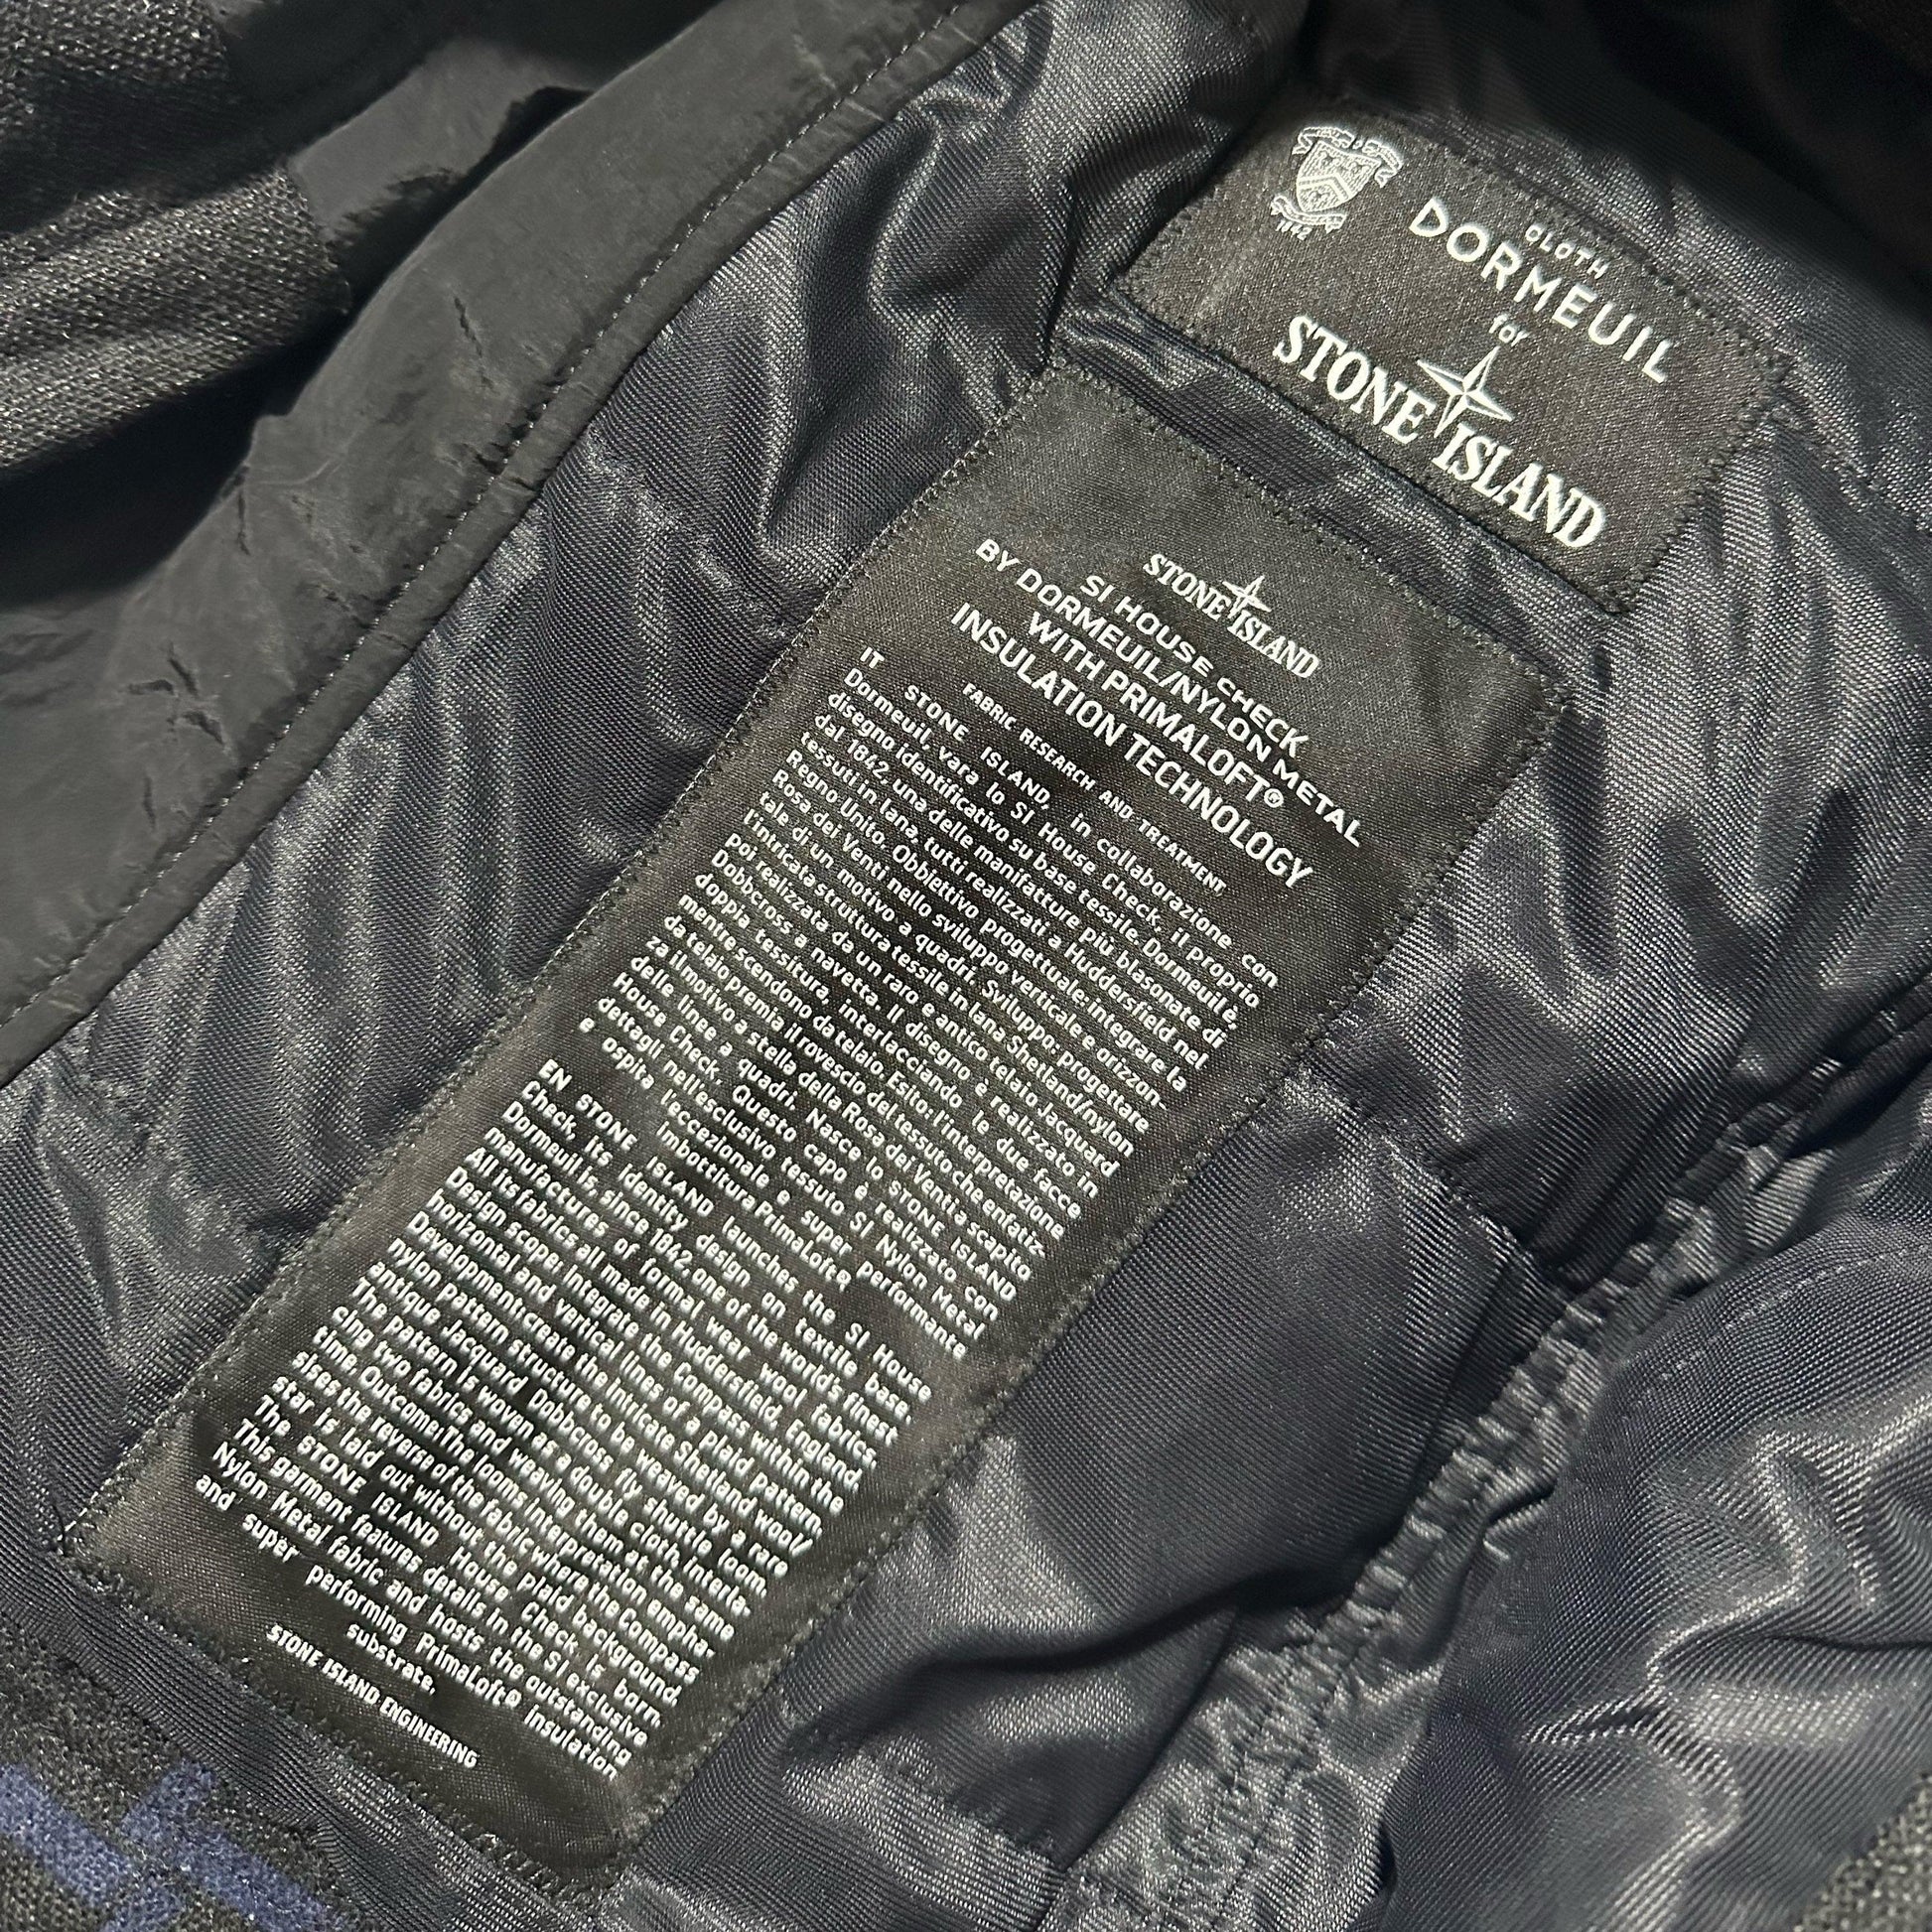 Stone Island Dormeuil House Check Primaloft Jacket with Special Process Badge - Known Source